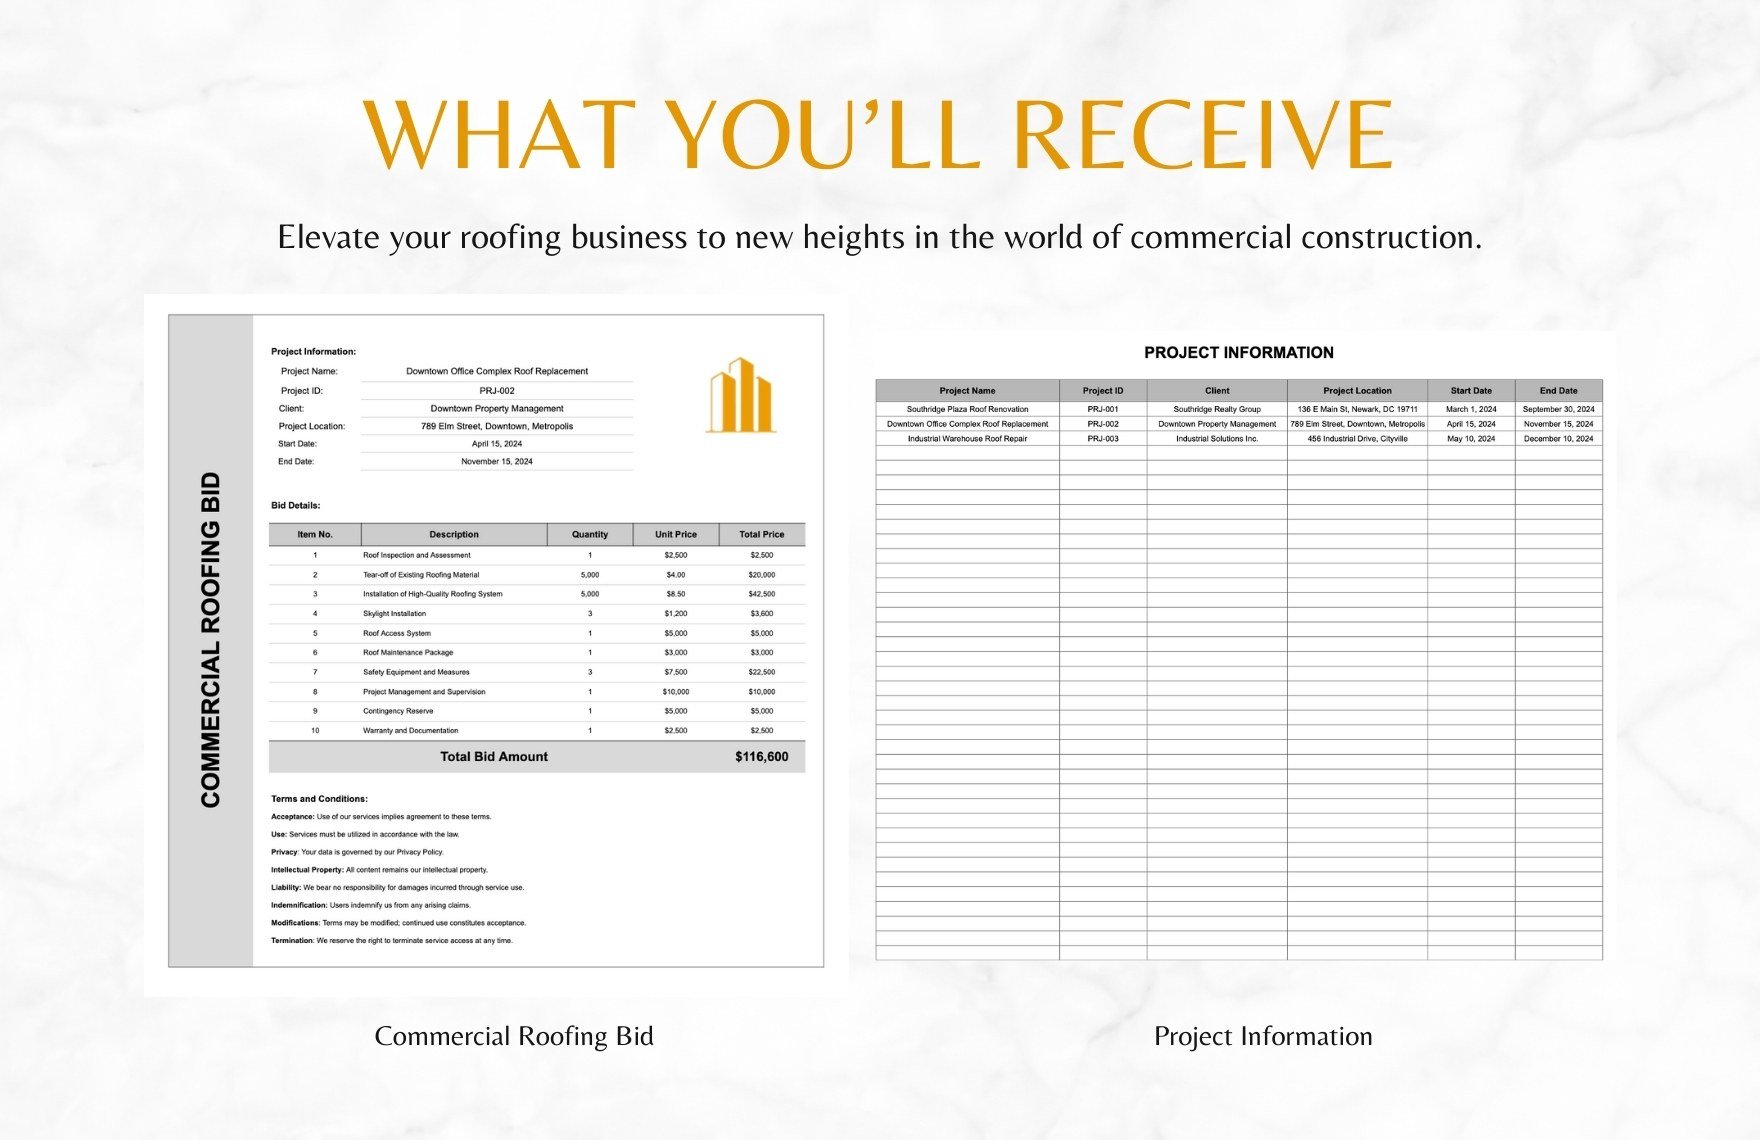 Commercial Roofing Bid Template